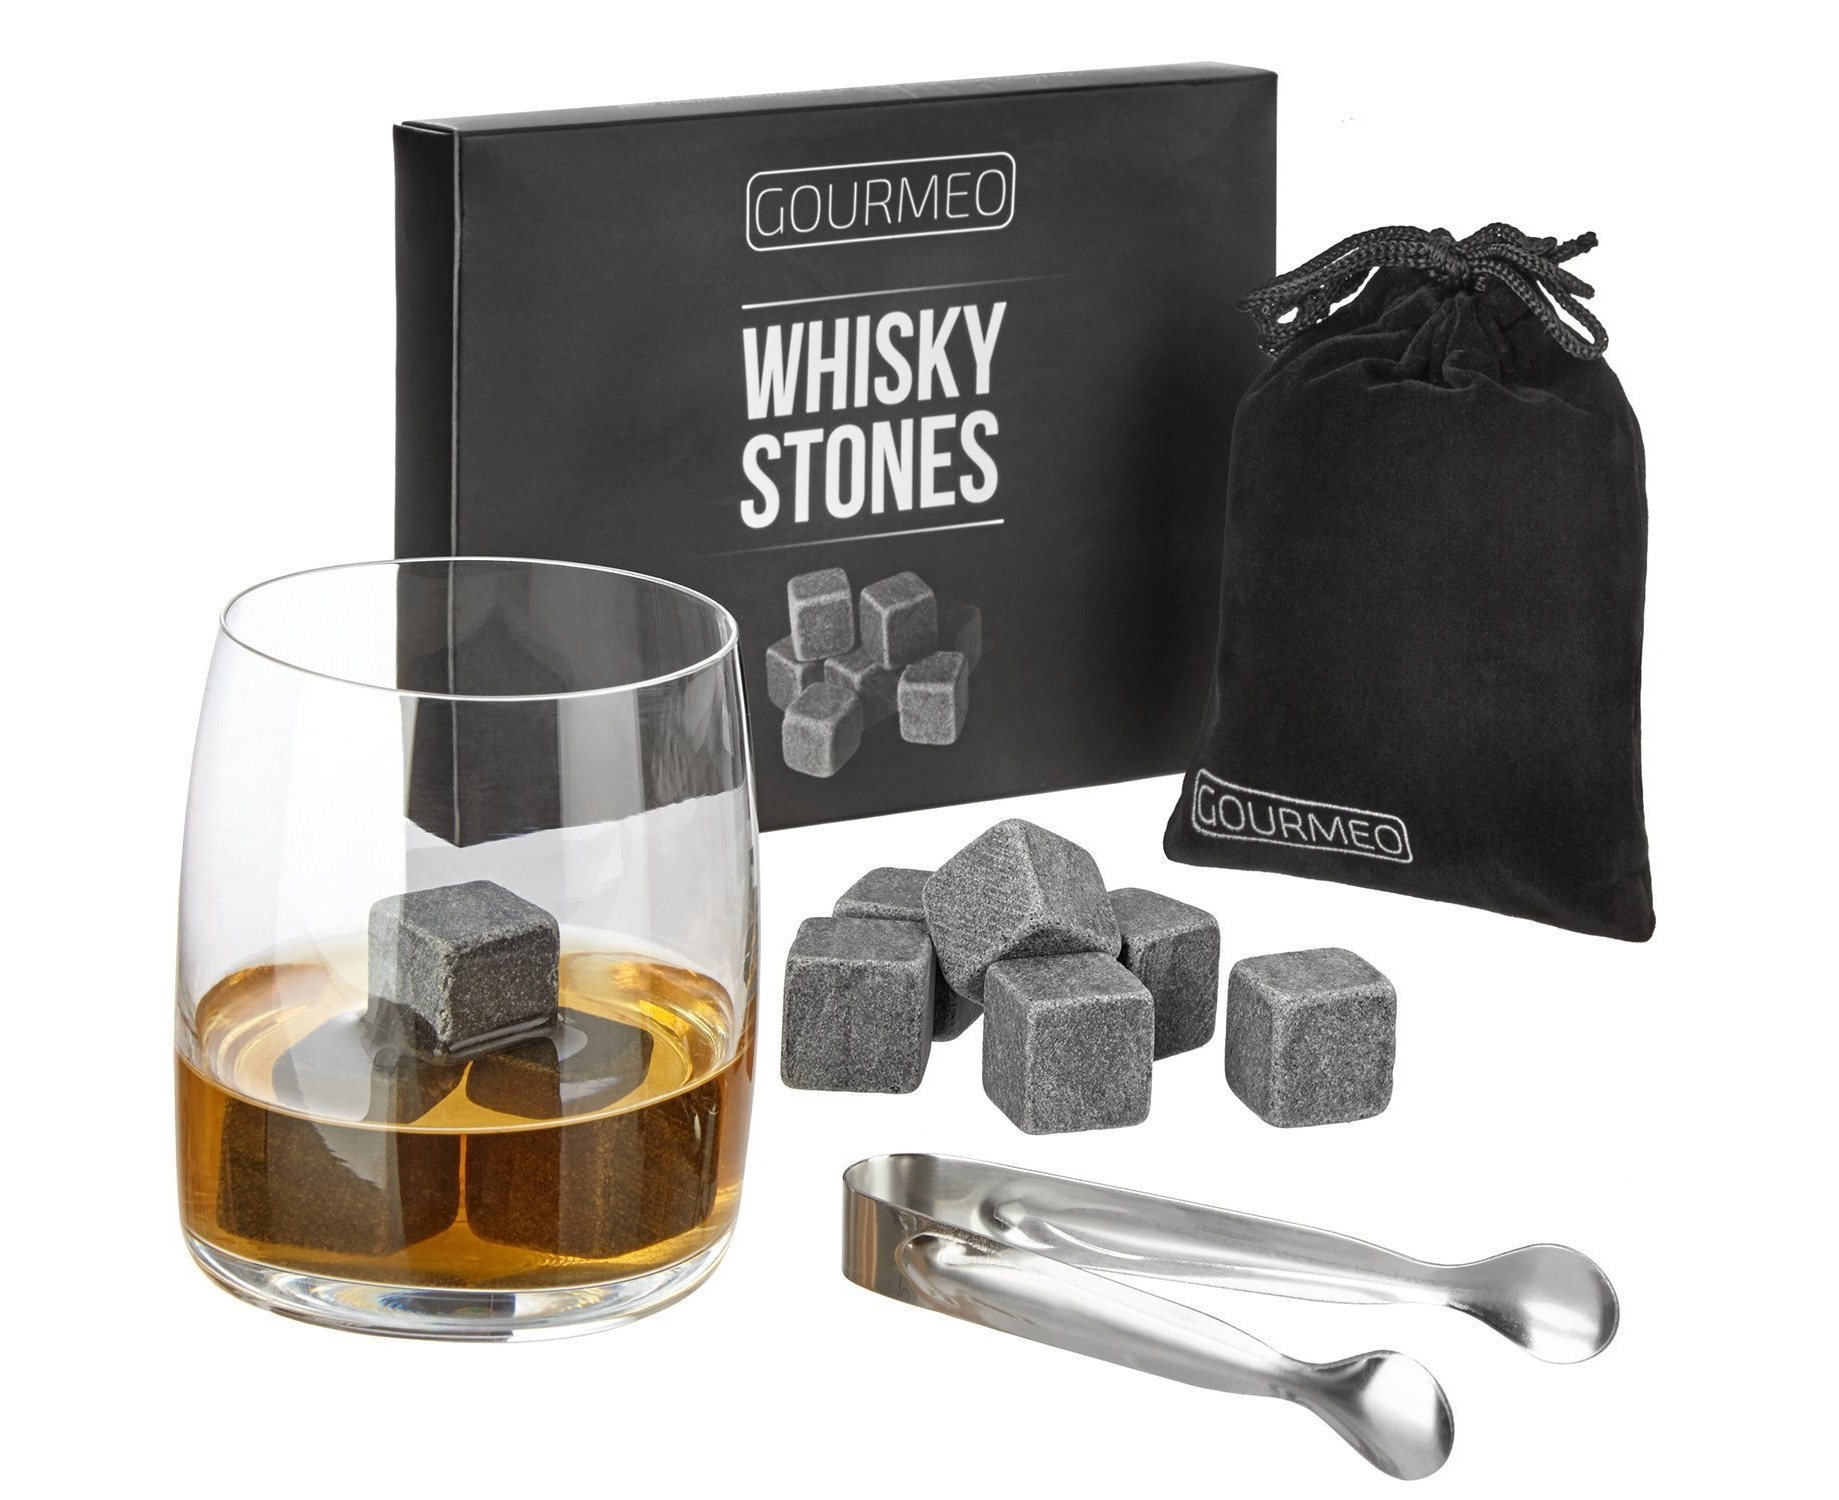 Christmas Beverage Chilling Rocks Premium Stainless Steel Gifts For Men Dad Set of 8 Whiskey Stones Includes Storage Tray and Silicone Tip Tongs. Diamond Shaped Reusable Ice Cubes 